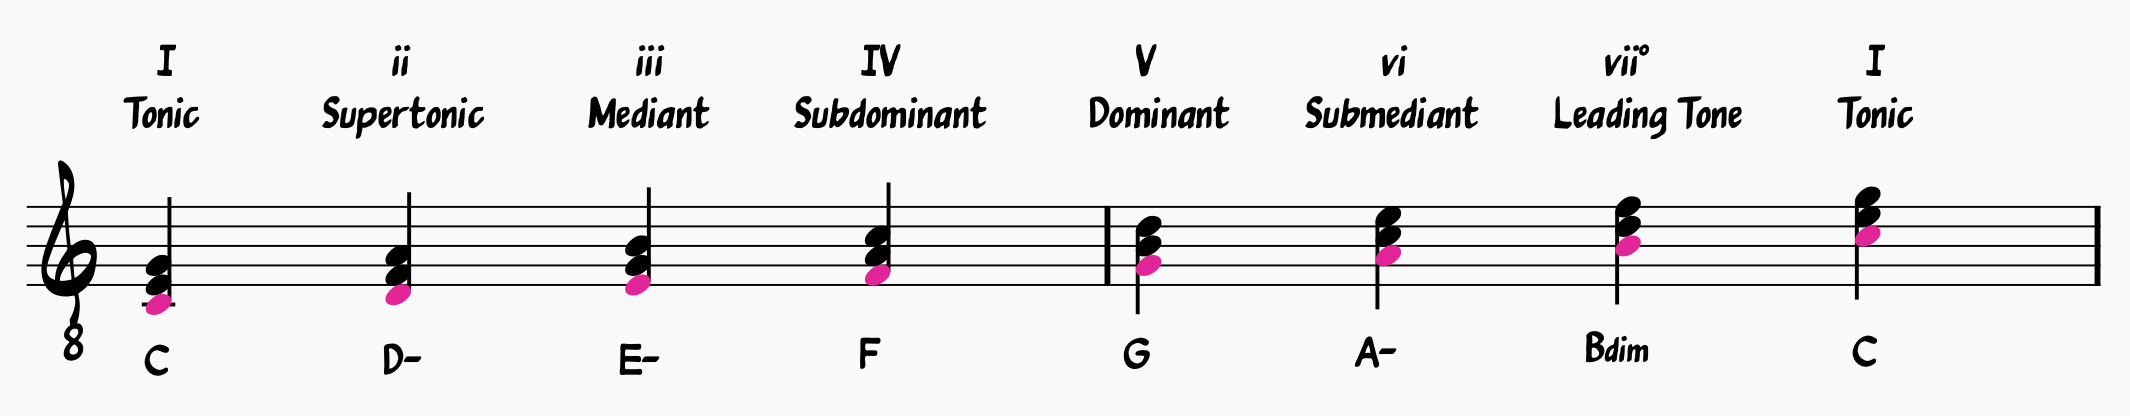 C major scale harmonized in thirds with scale degrees and Roman Numeral chords shown